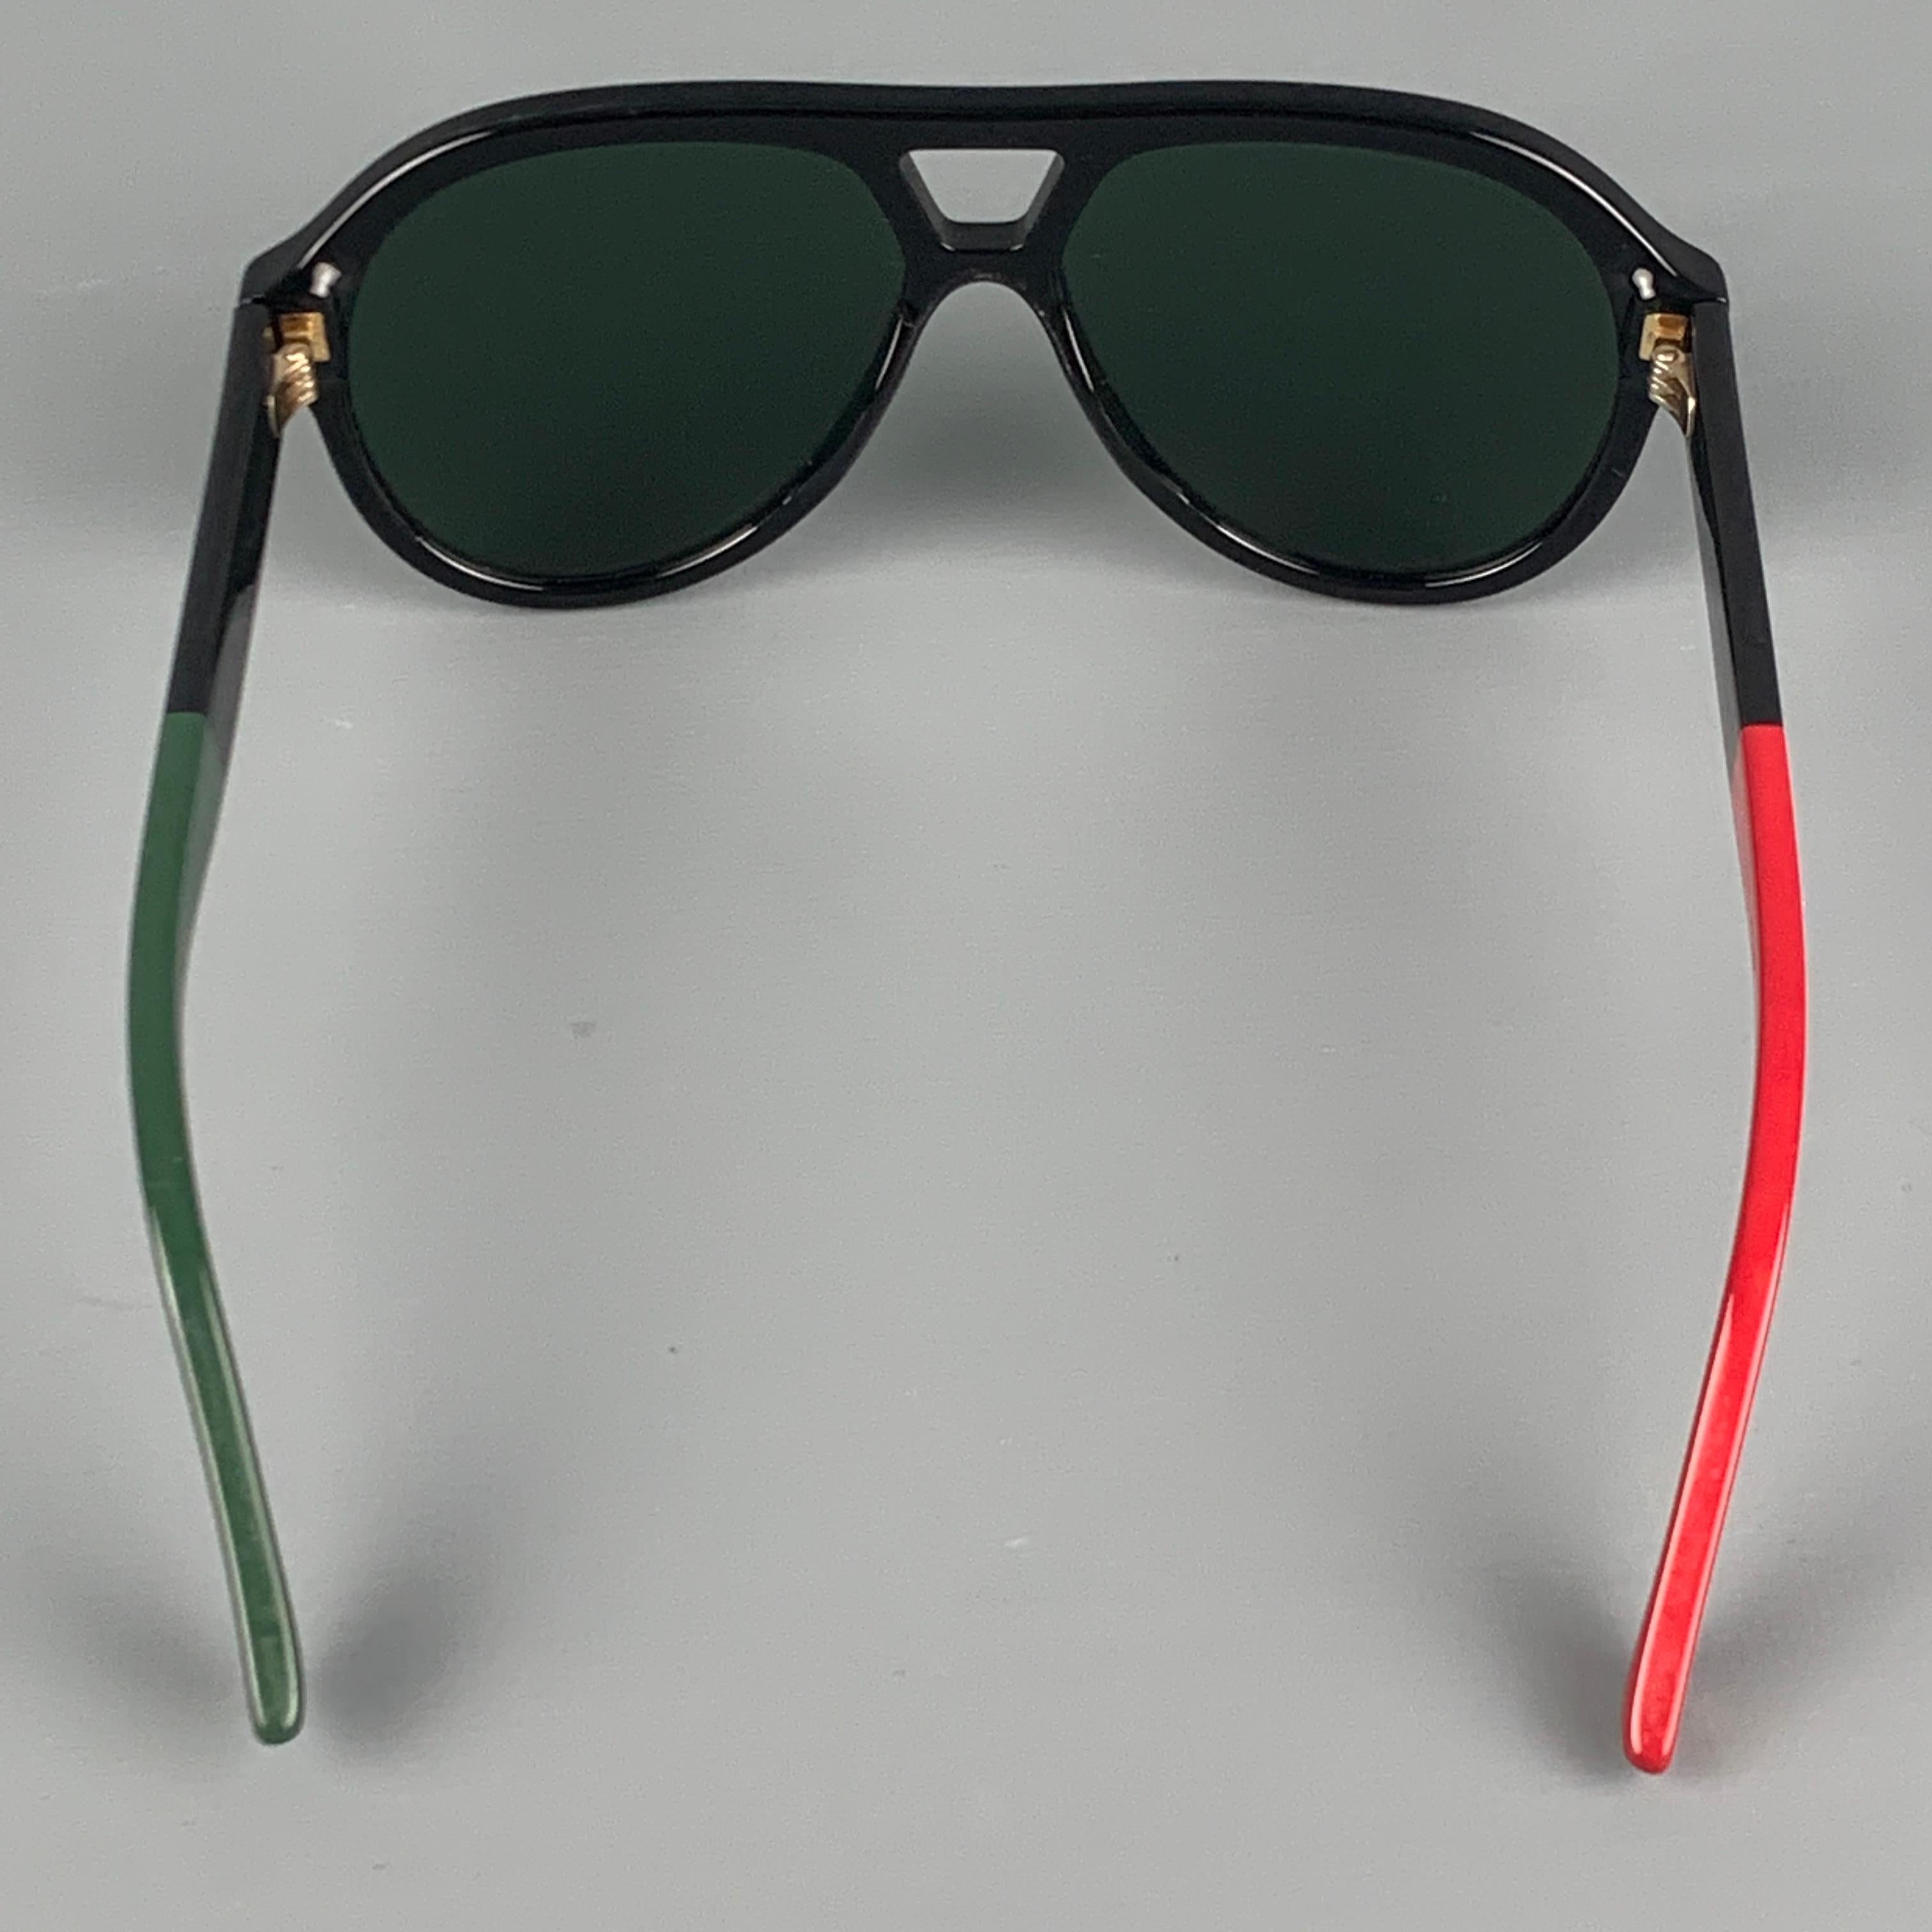 gucci sunglasses red and green sides